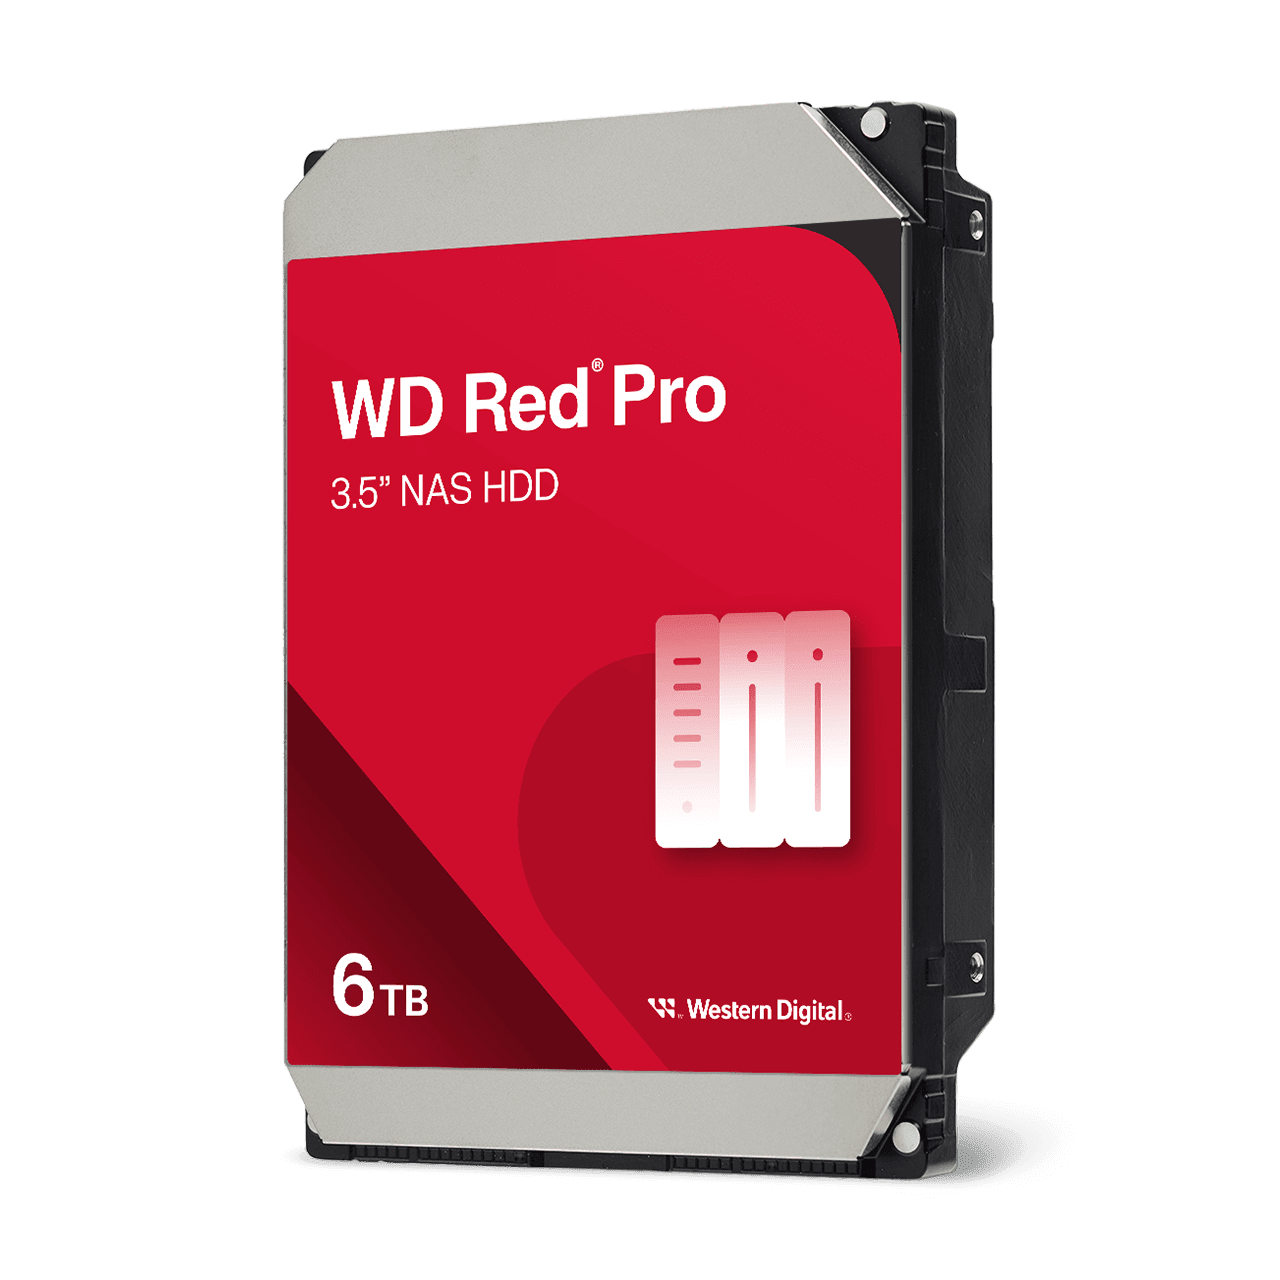 WD Red™ Pro 6TB NAS Hard Drive - Image3